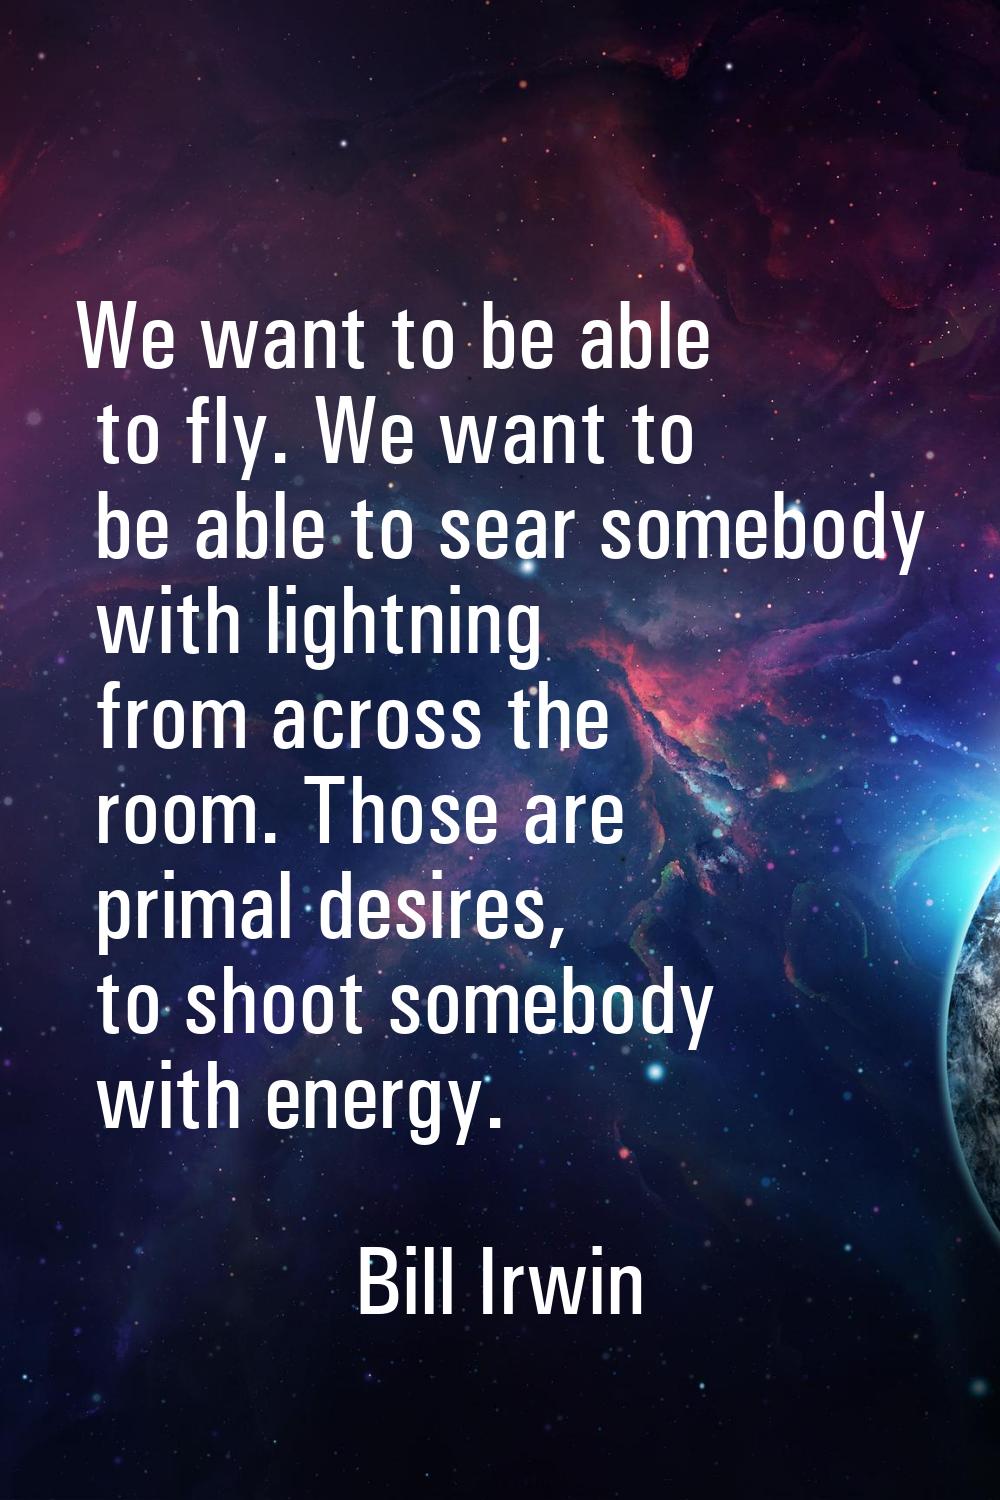 We want to be able to fly. We want to be able to sear somebody with lightning from across the room.